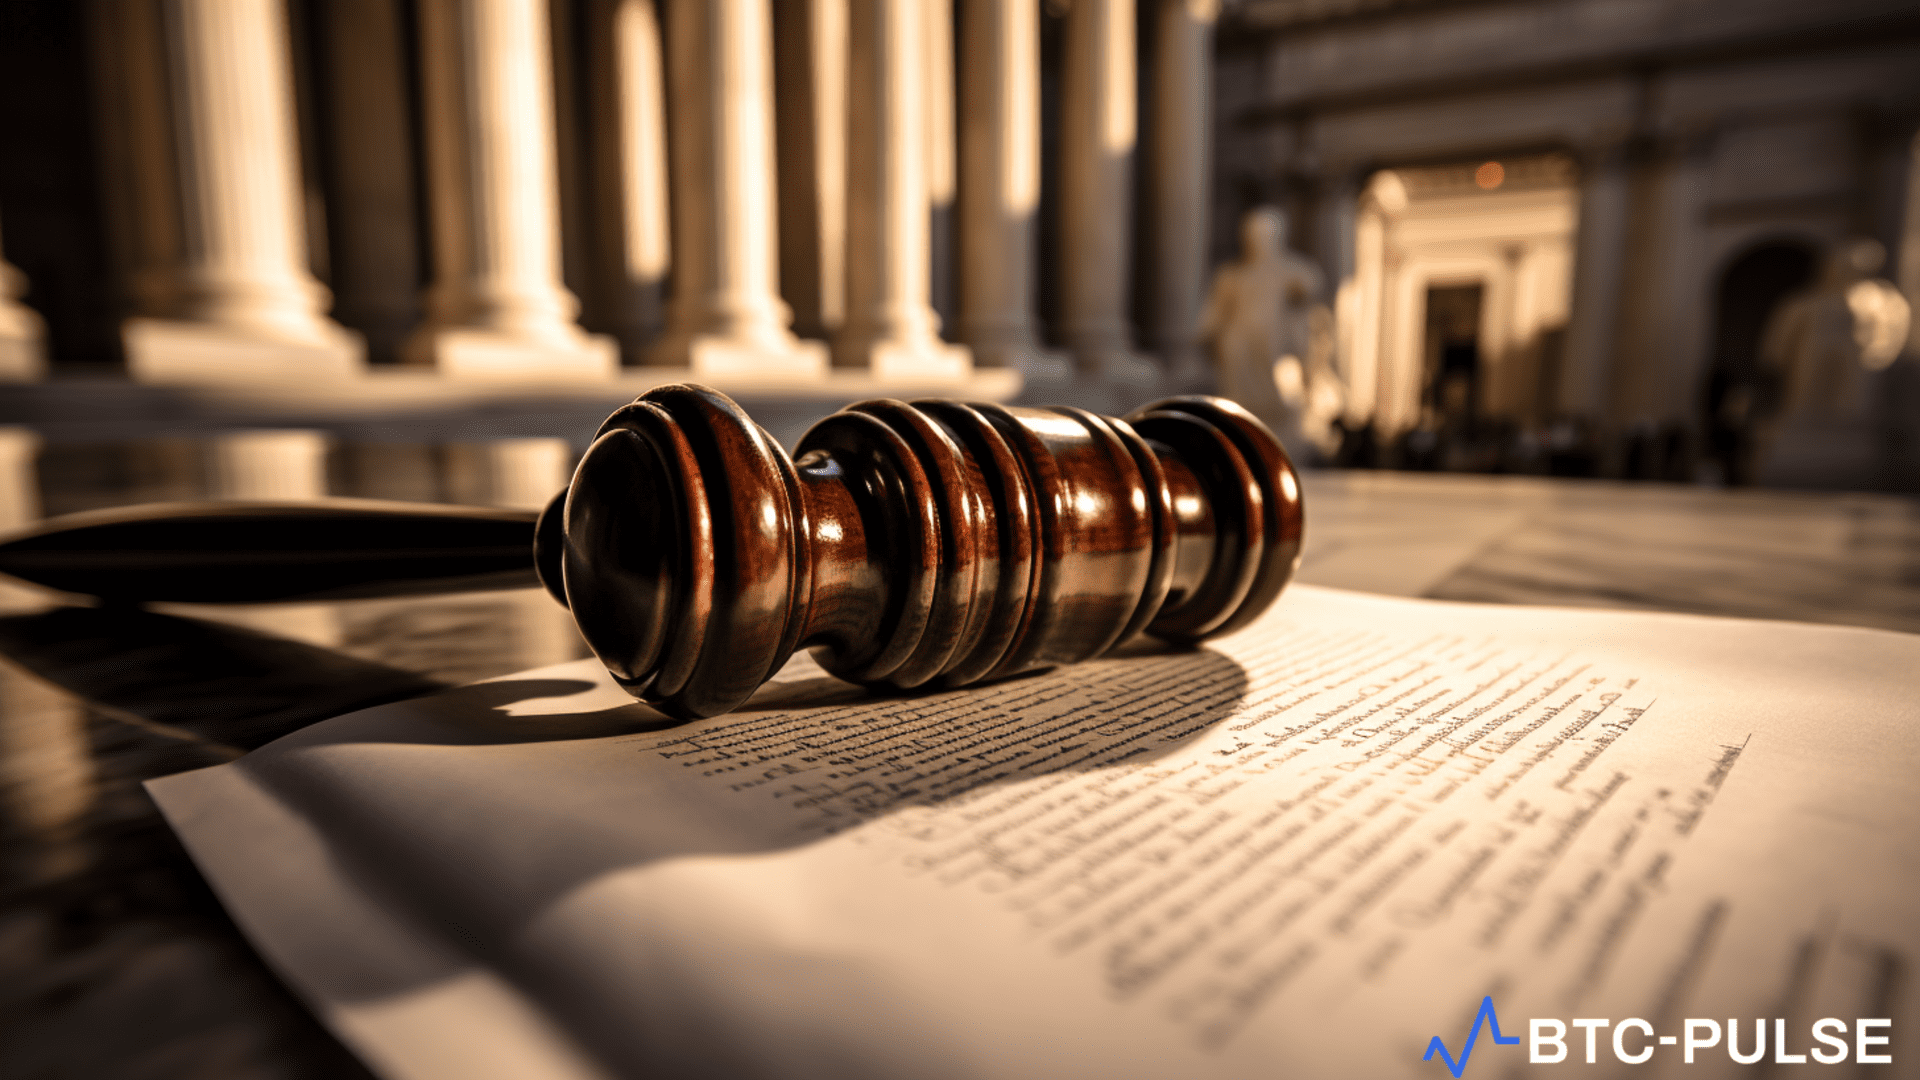 Federal Court Denies Custodia Bank’s Bid for Federal Reserve Master Account Amid Crypto Banking Challengesv